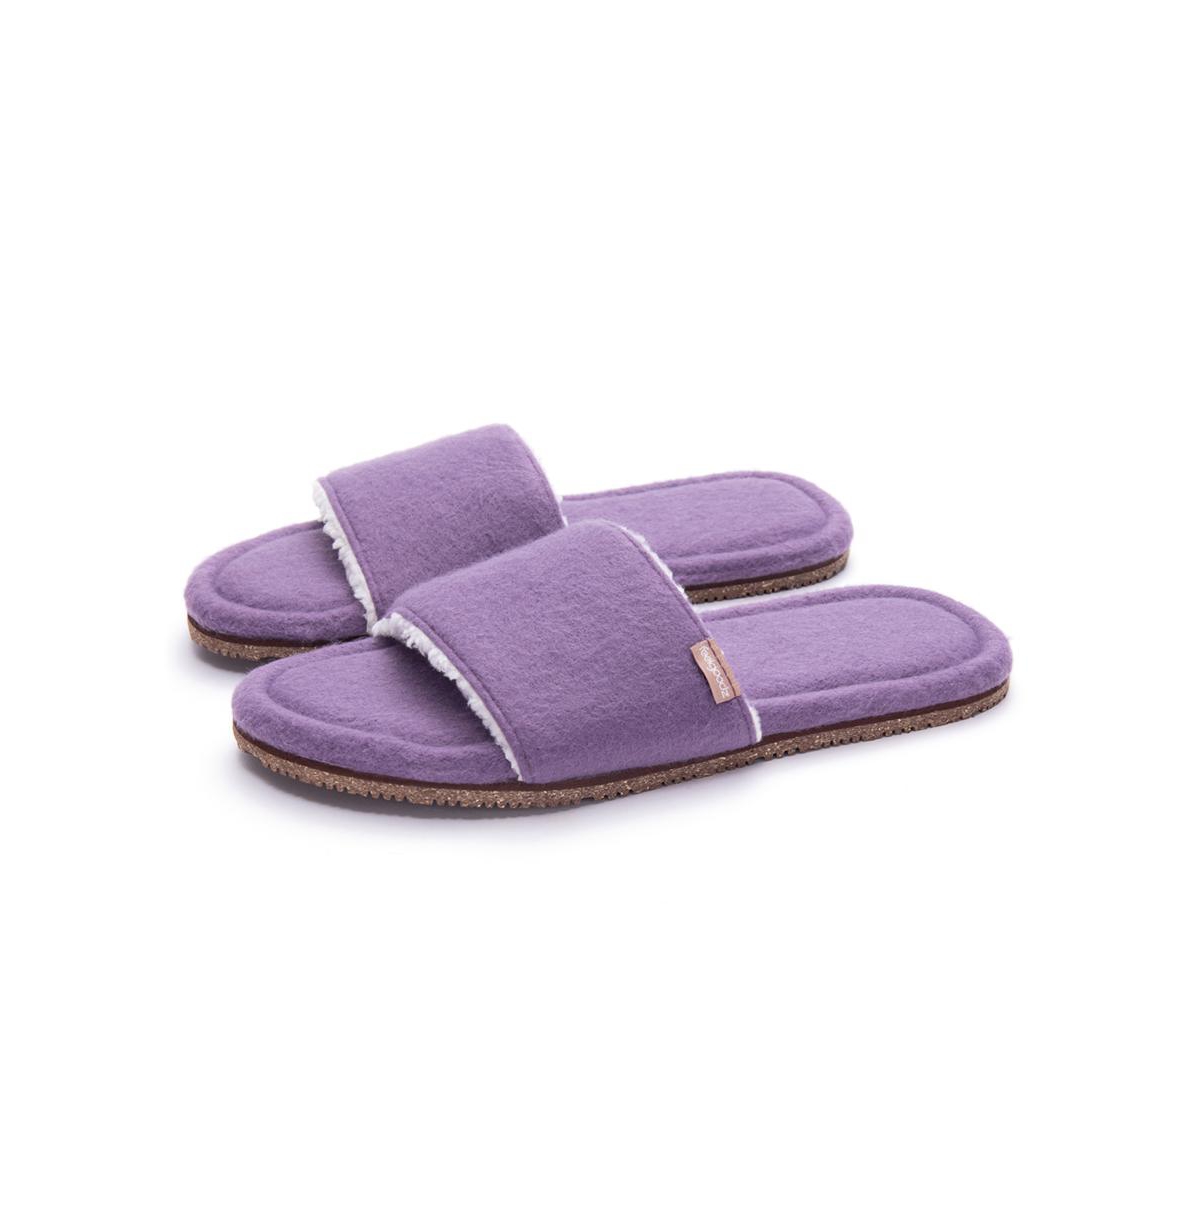 Women's Soft Slide Indoor / Outdoor Natural Rubber Sole House Shoes - Thistle